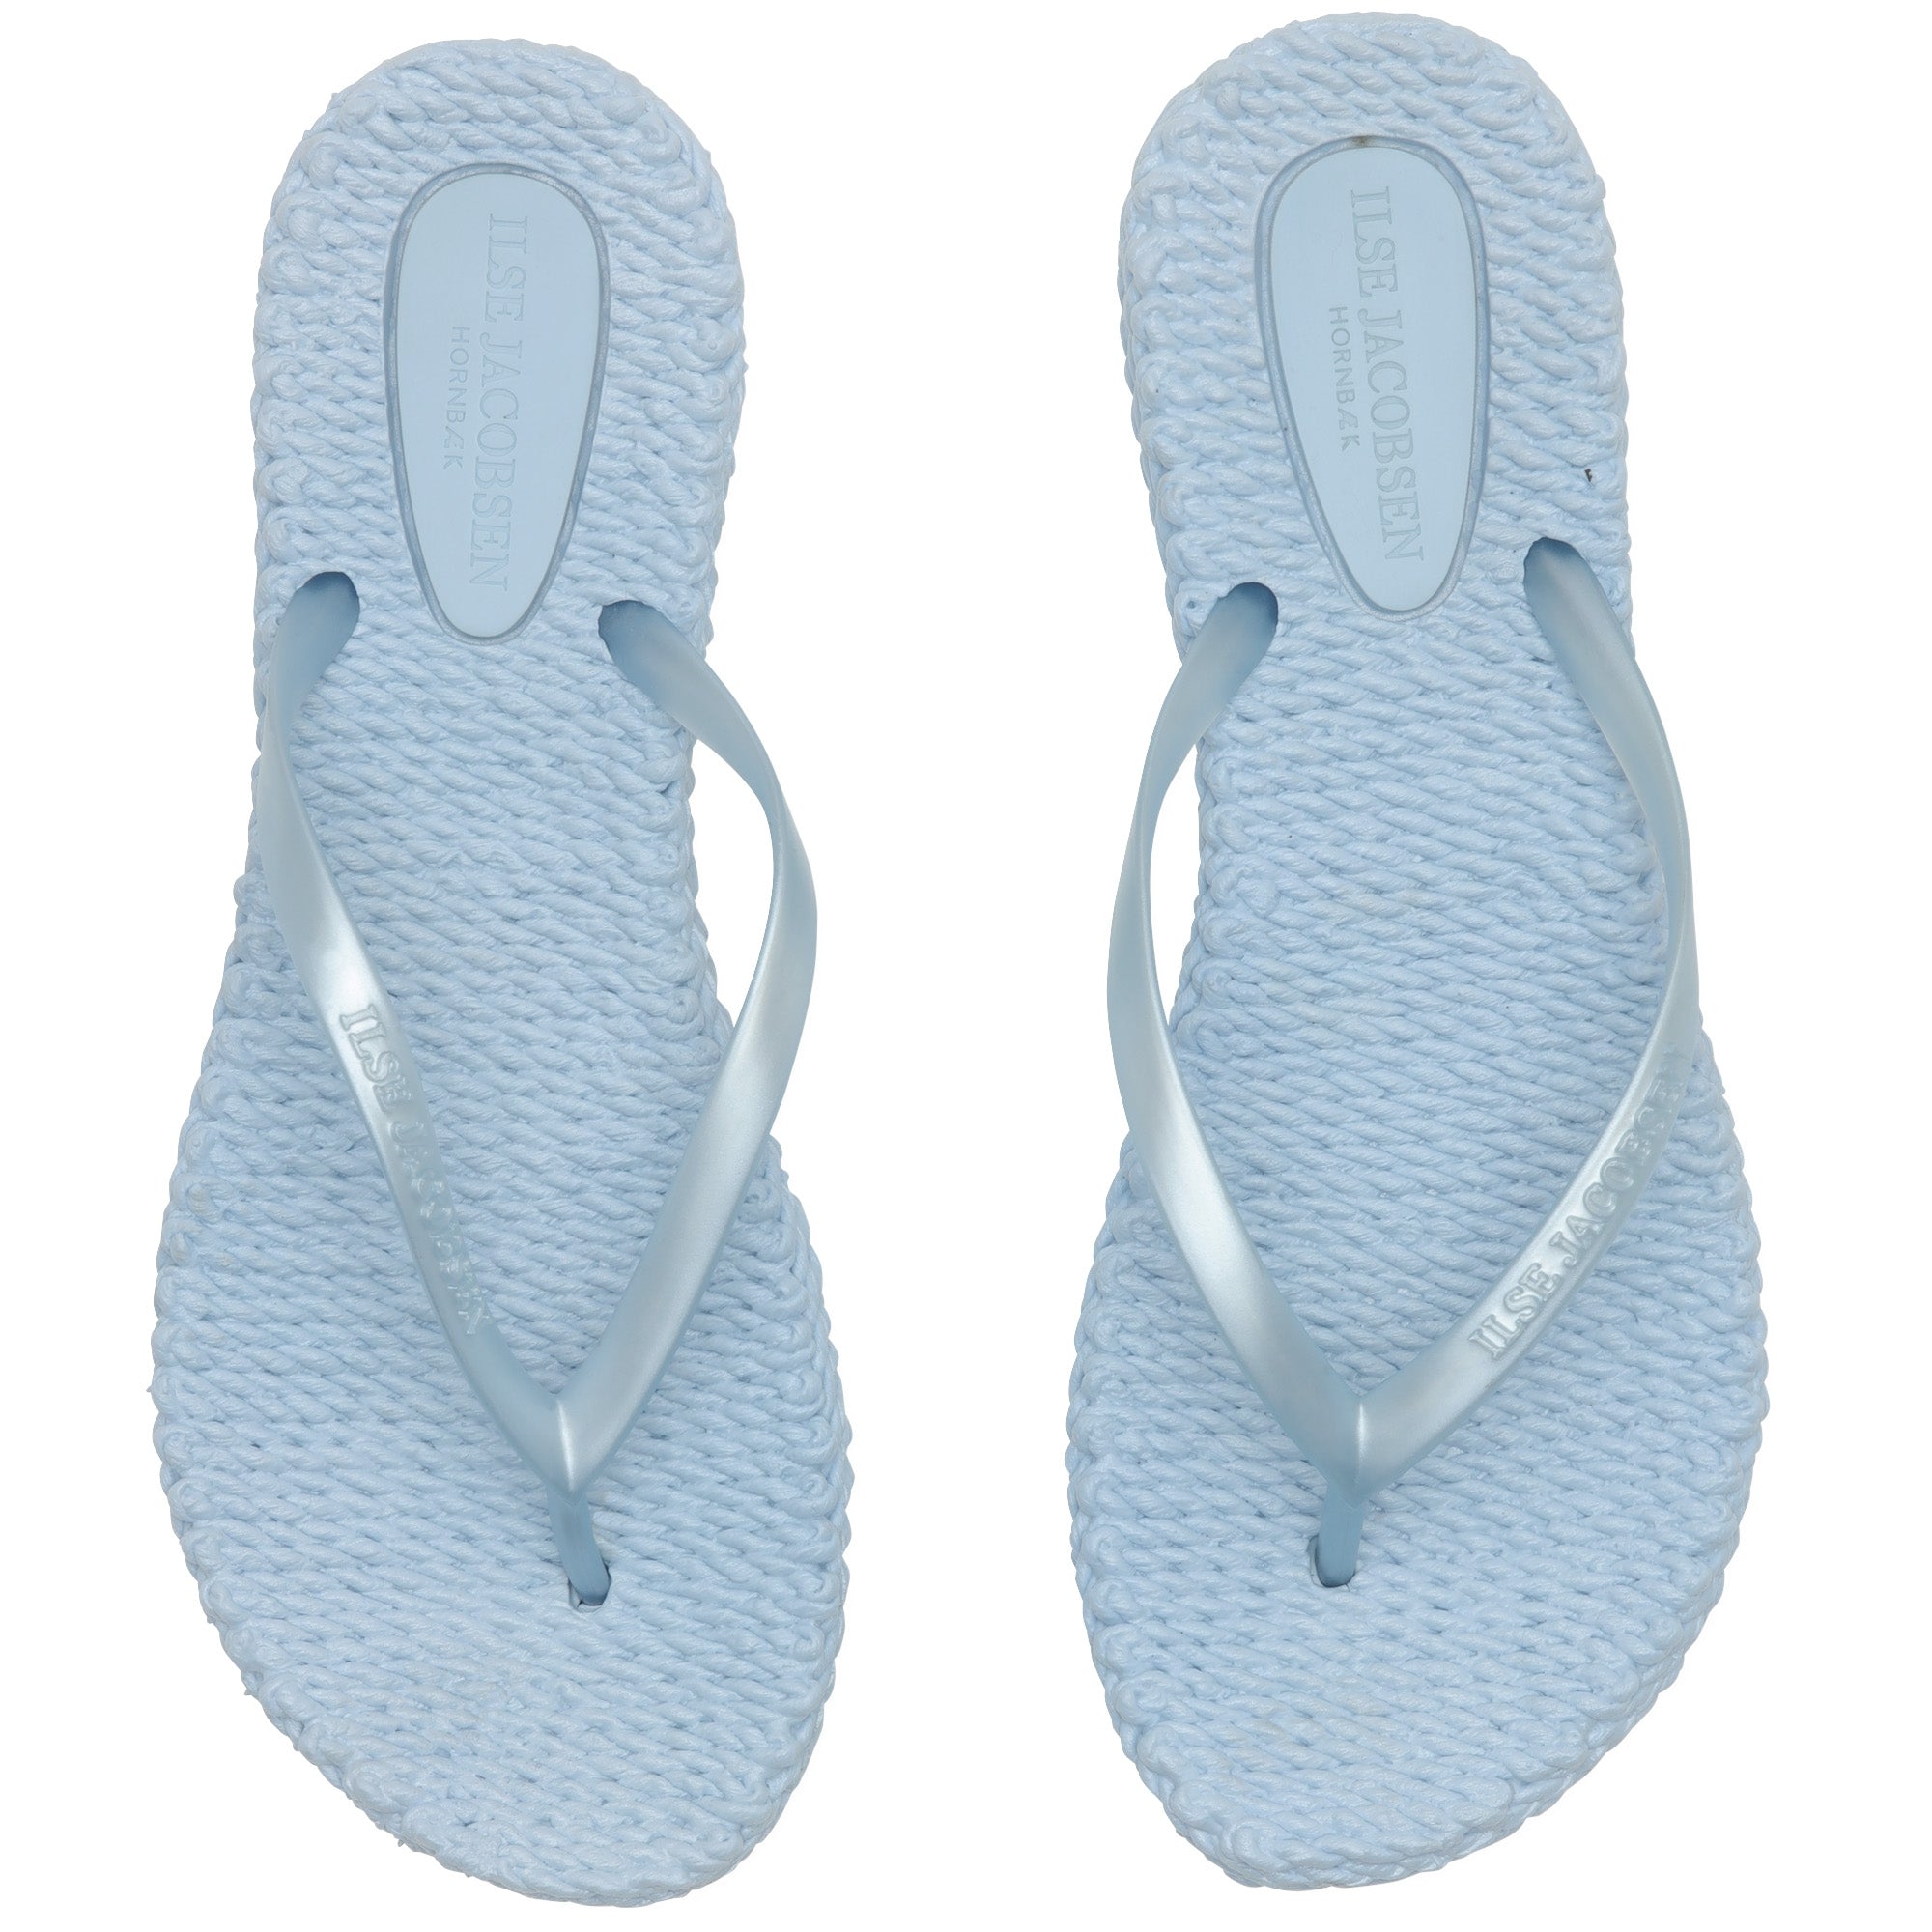 Slippers CHEERFUL02 - 658 Blue Bell | Blue Bell